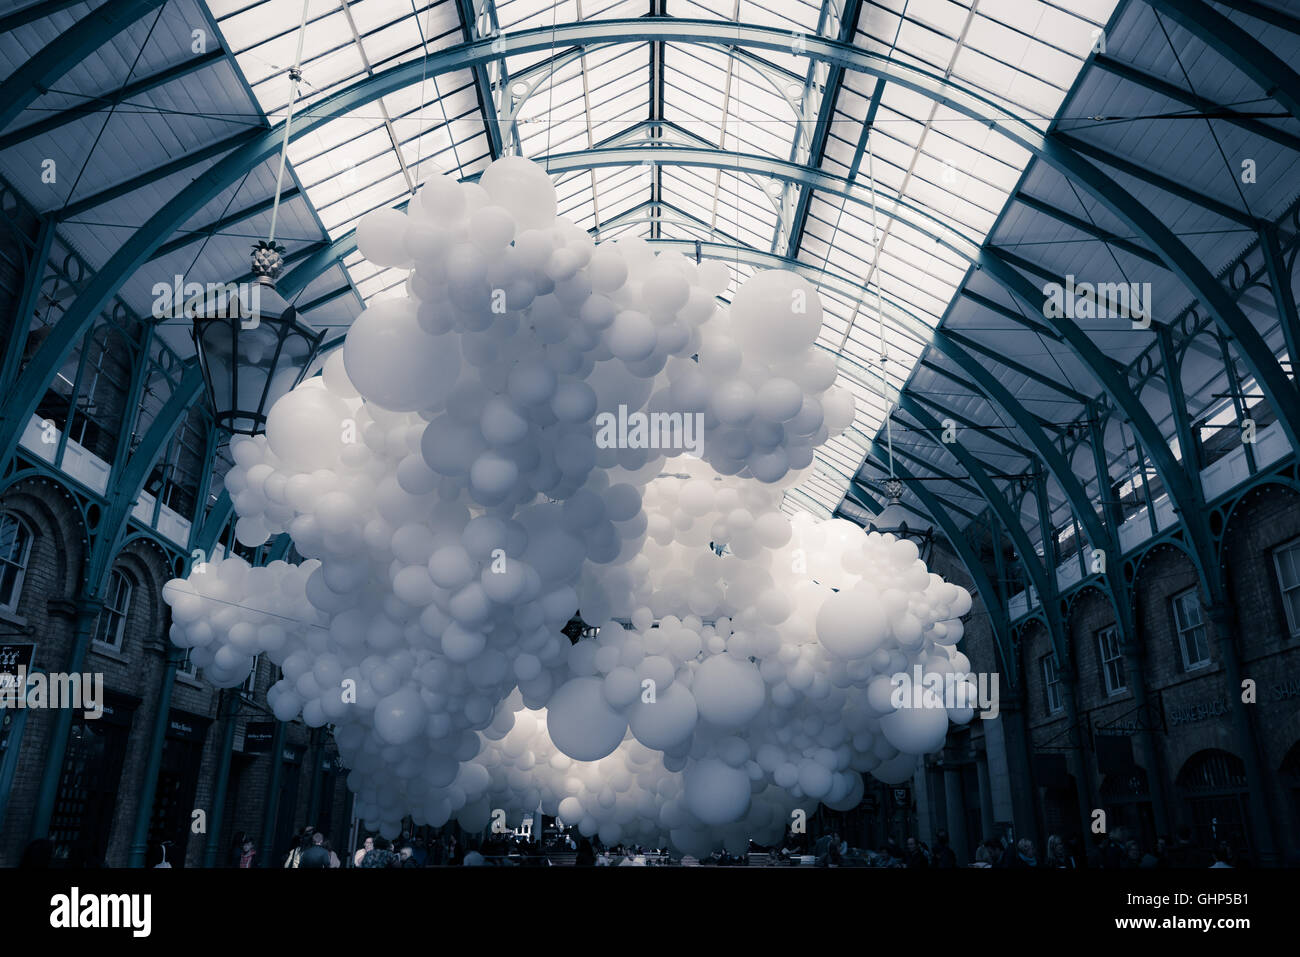 Up, Up and Away Balloon Installation in South Hall of the Grade II listed Market Building, Covent Garden, London, United Kingdom Stock Photo